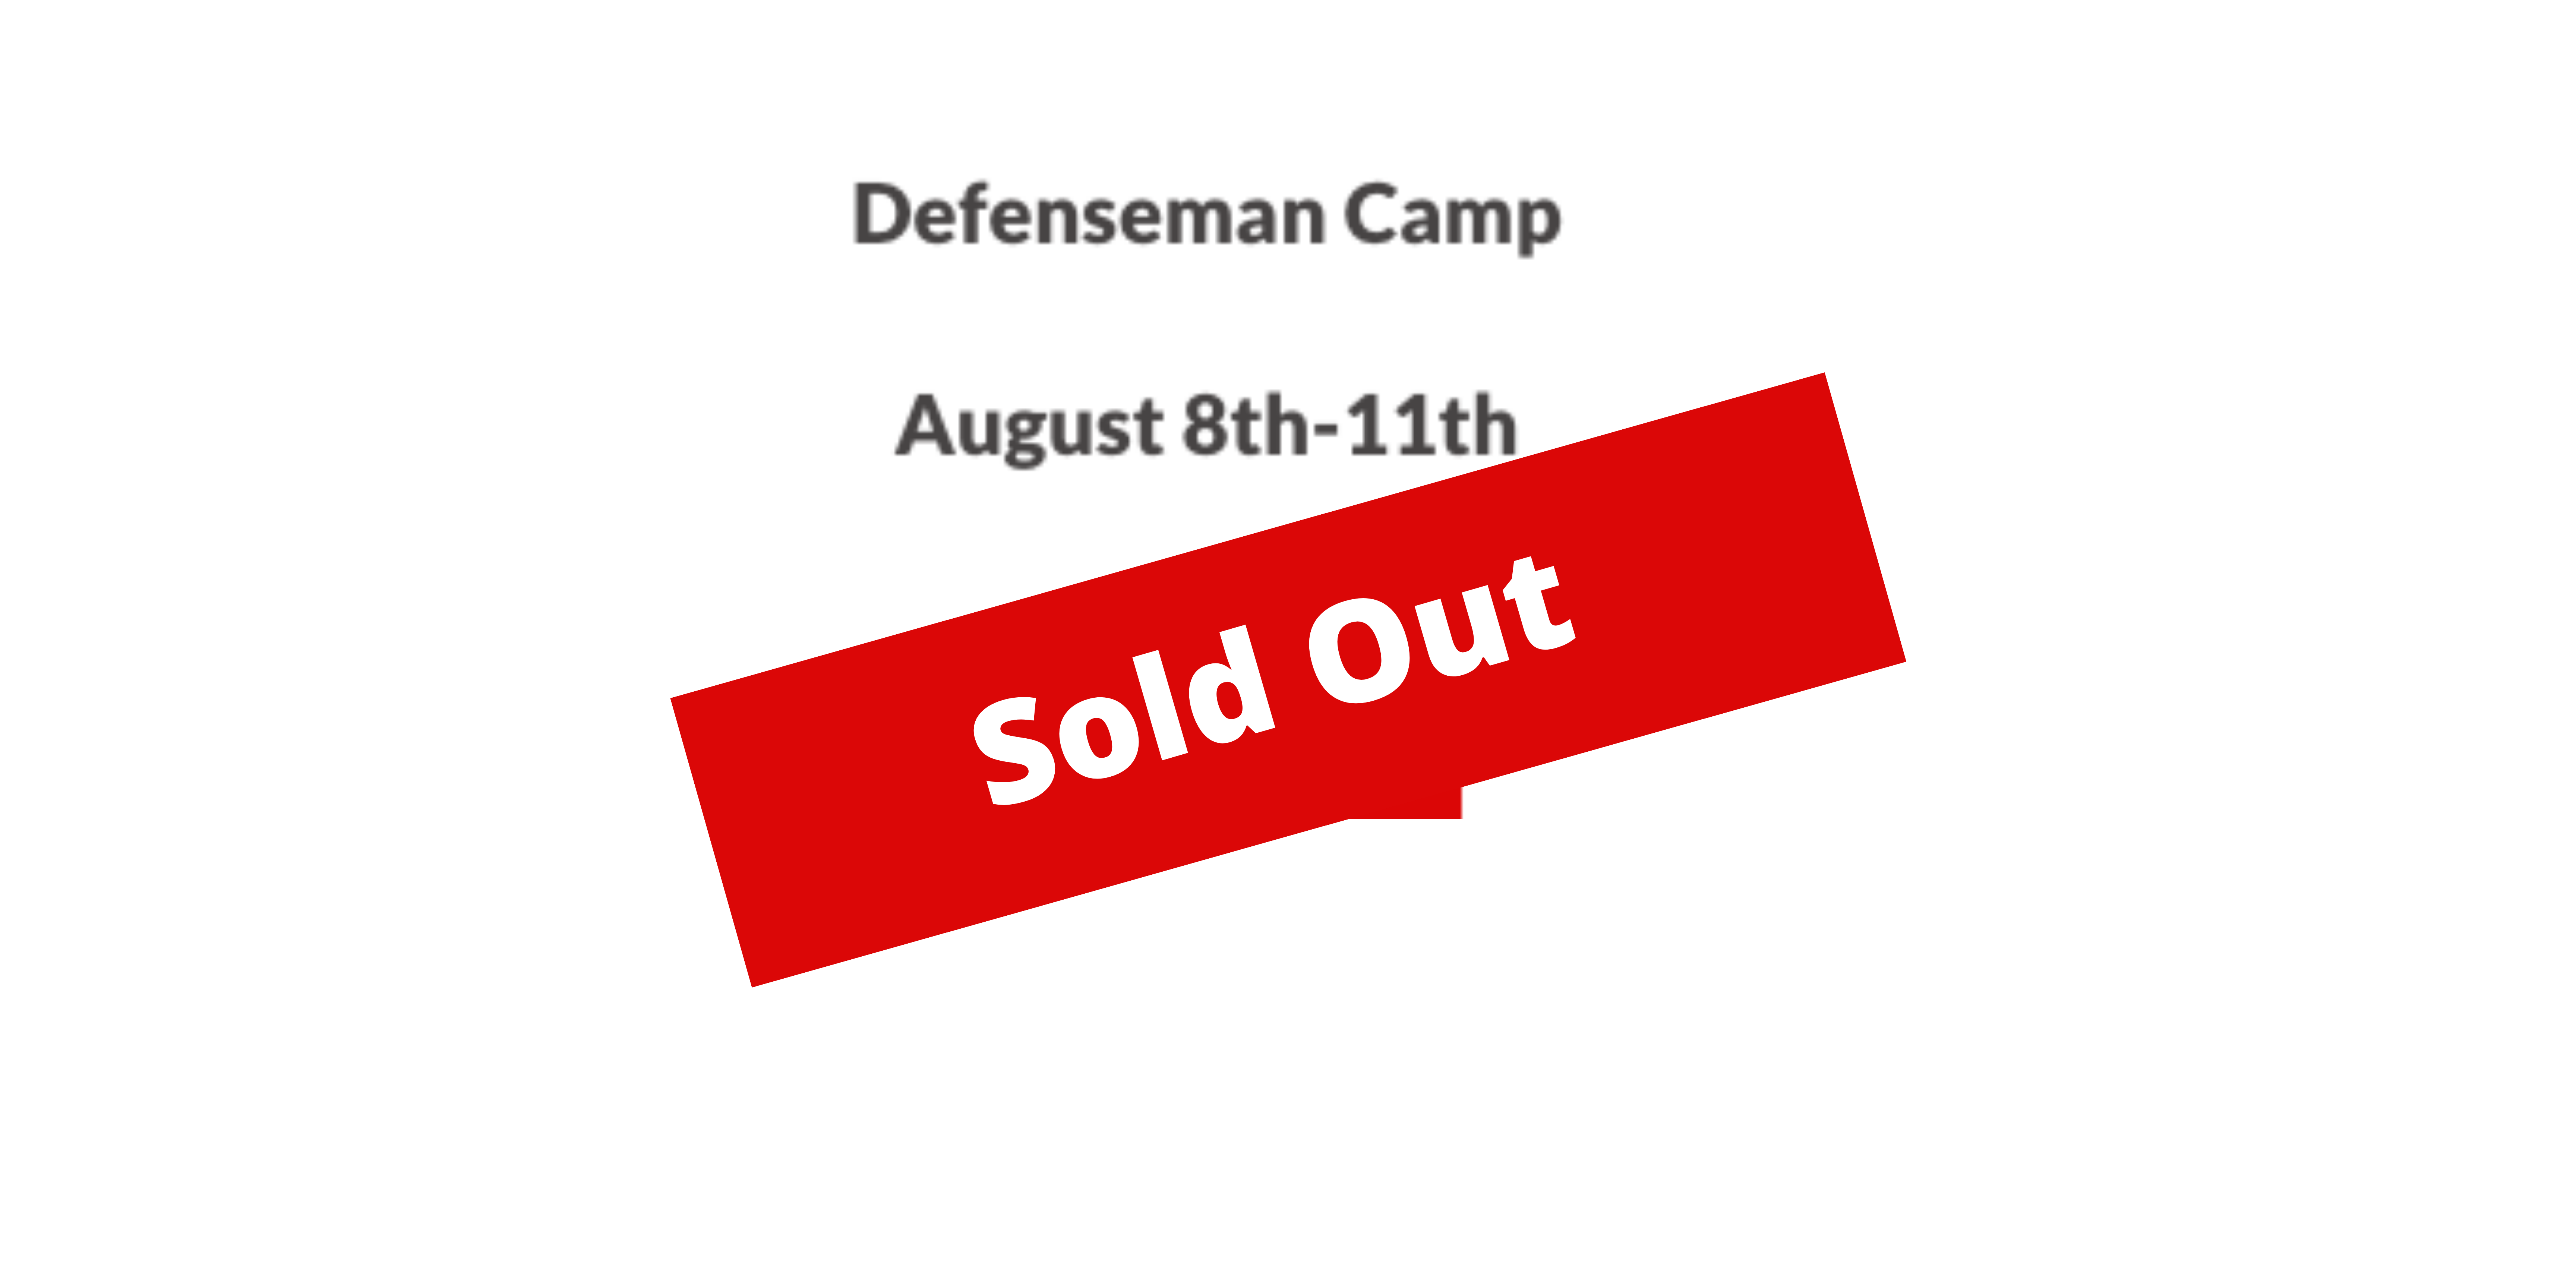 defenseman camp - sold out